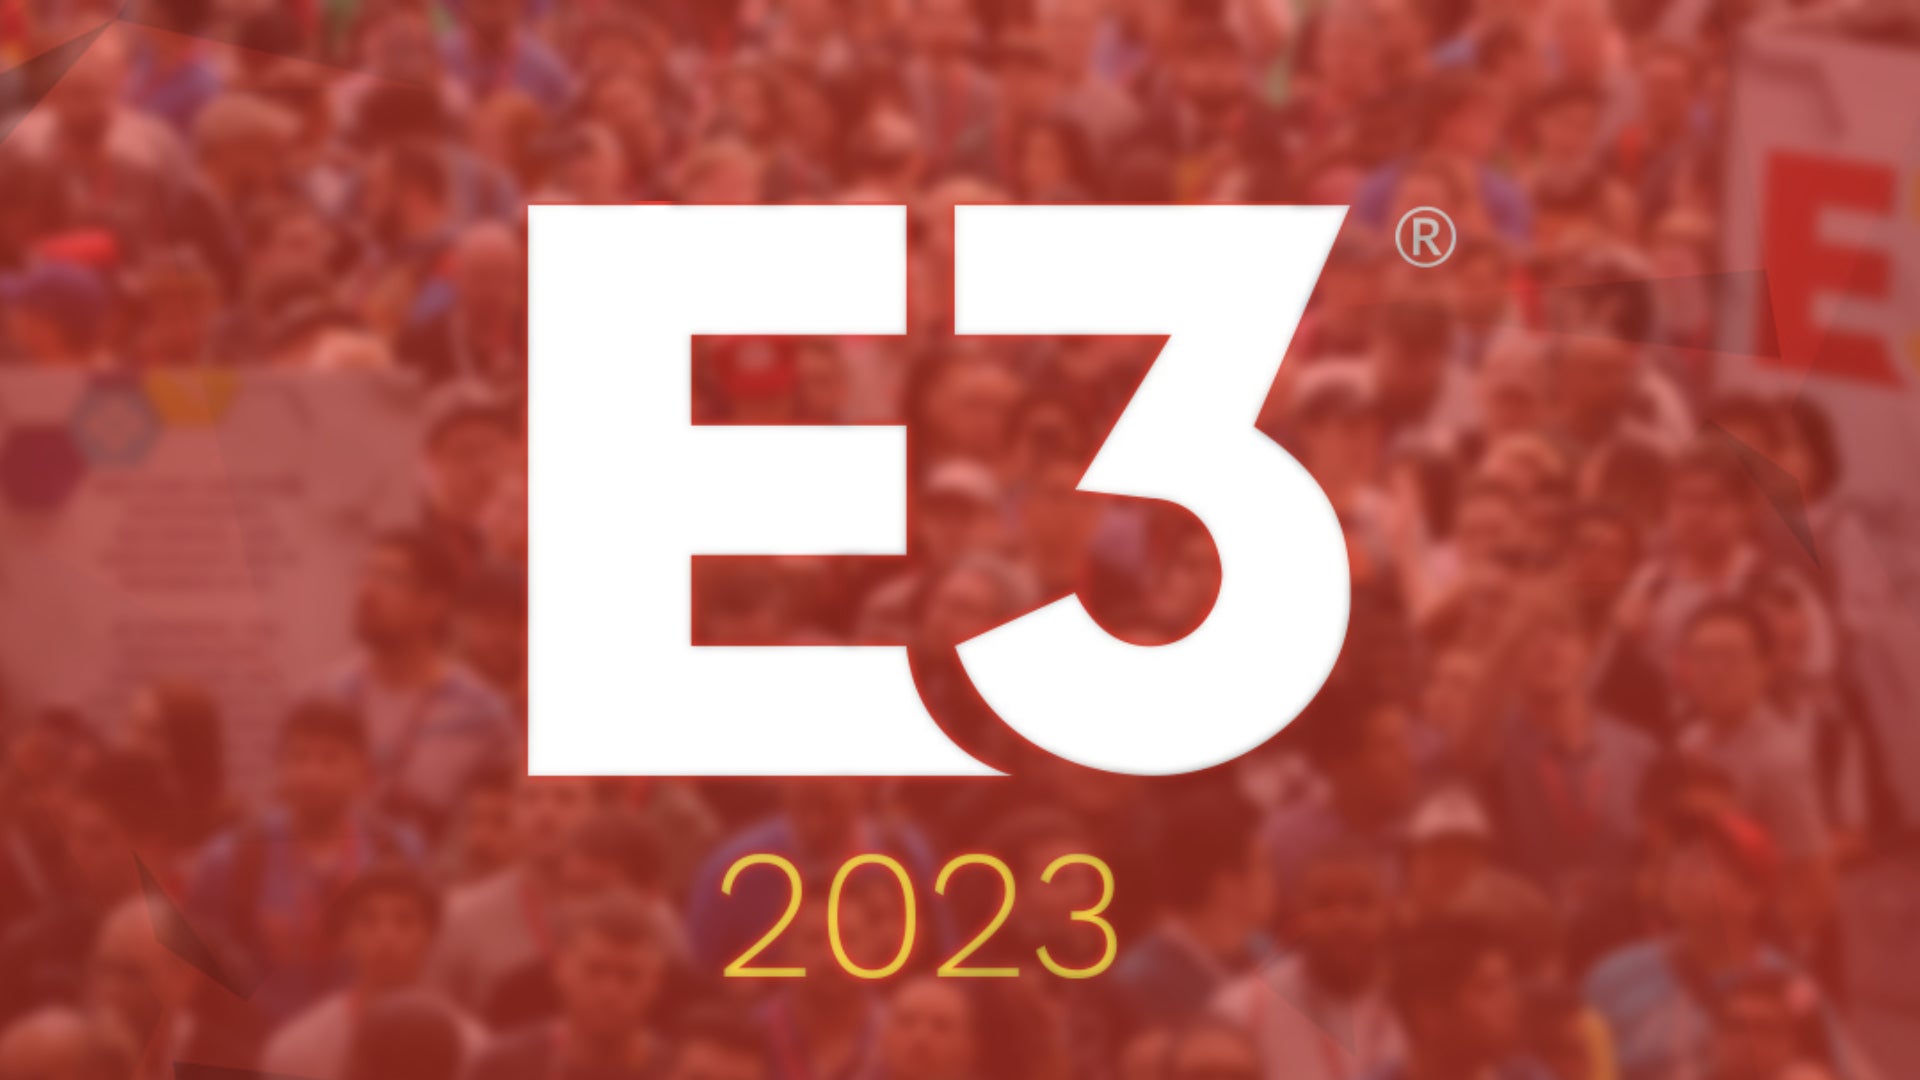 Image for E3 returns as an in-person event in 2023